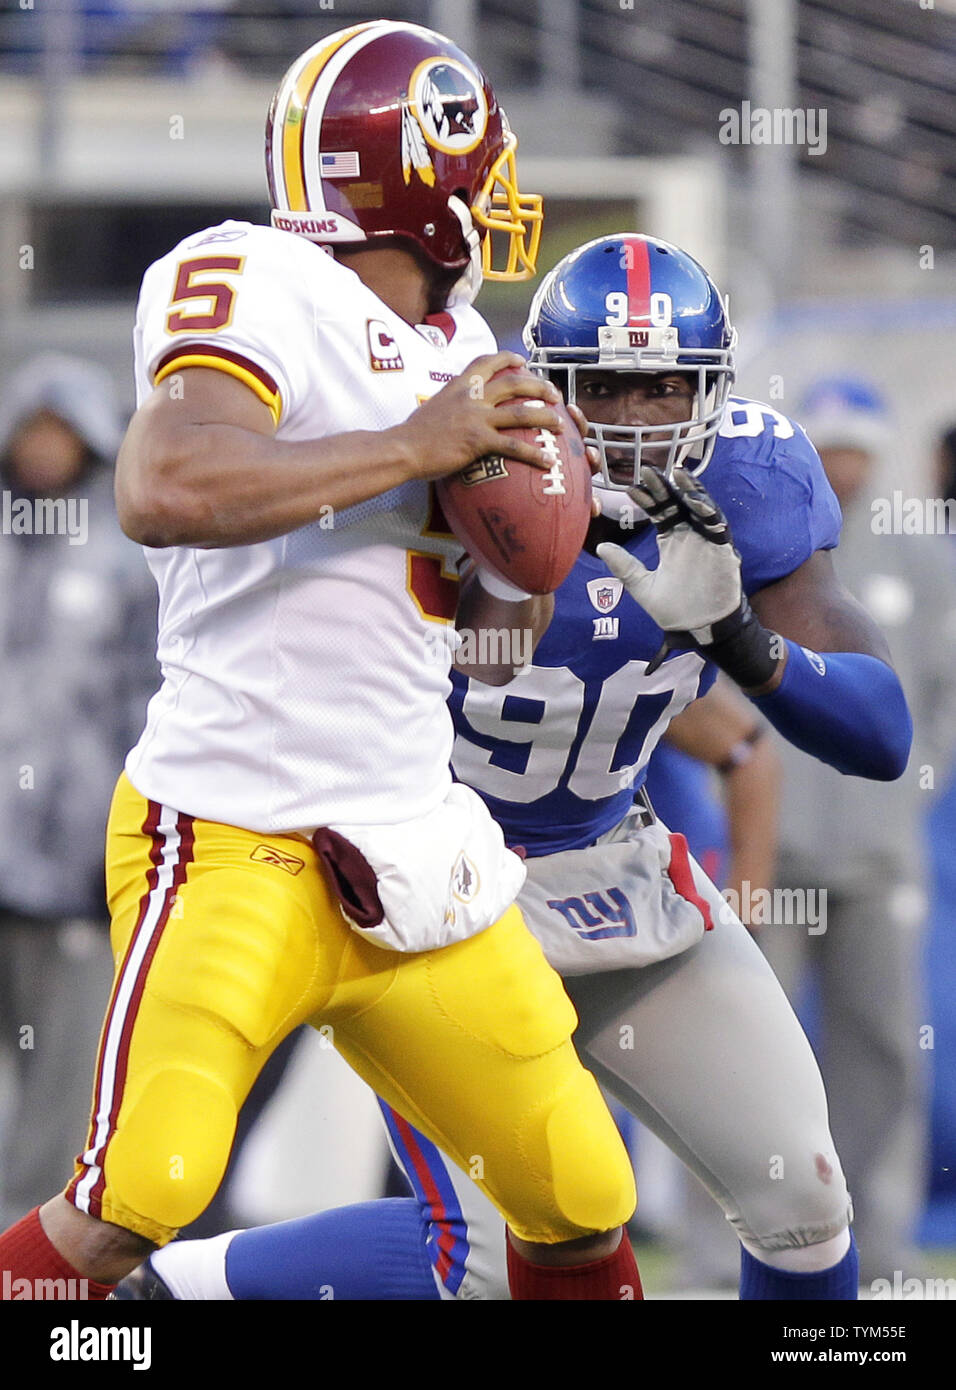 New York Giants Jason Pierre-Paul puts pressure on Washington Redskins quarterback Donovan McNabb in third quarter at New Meadowlands Stadium in week 13 of the NFL in East Rutherford, New Jersey on December 5, 2010. The Giants defeated the Redskins 31-7.     UPI /John Angelillo Stock Photo